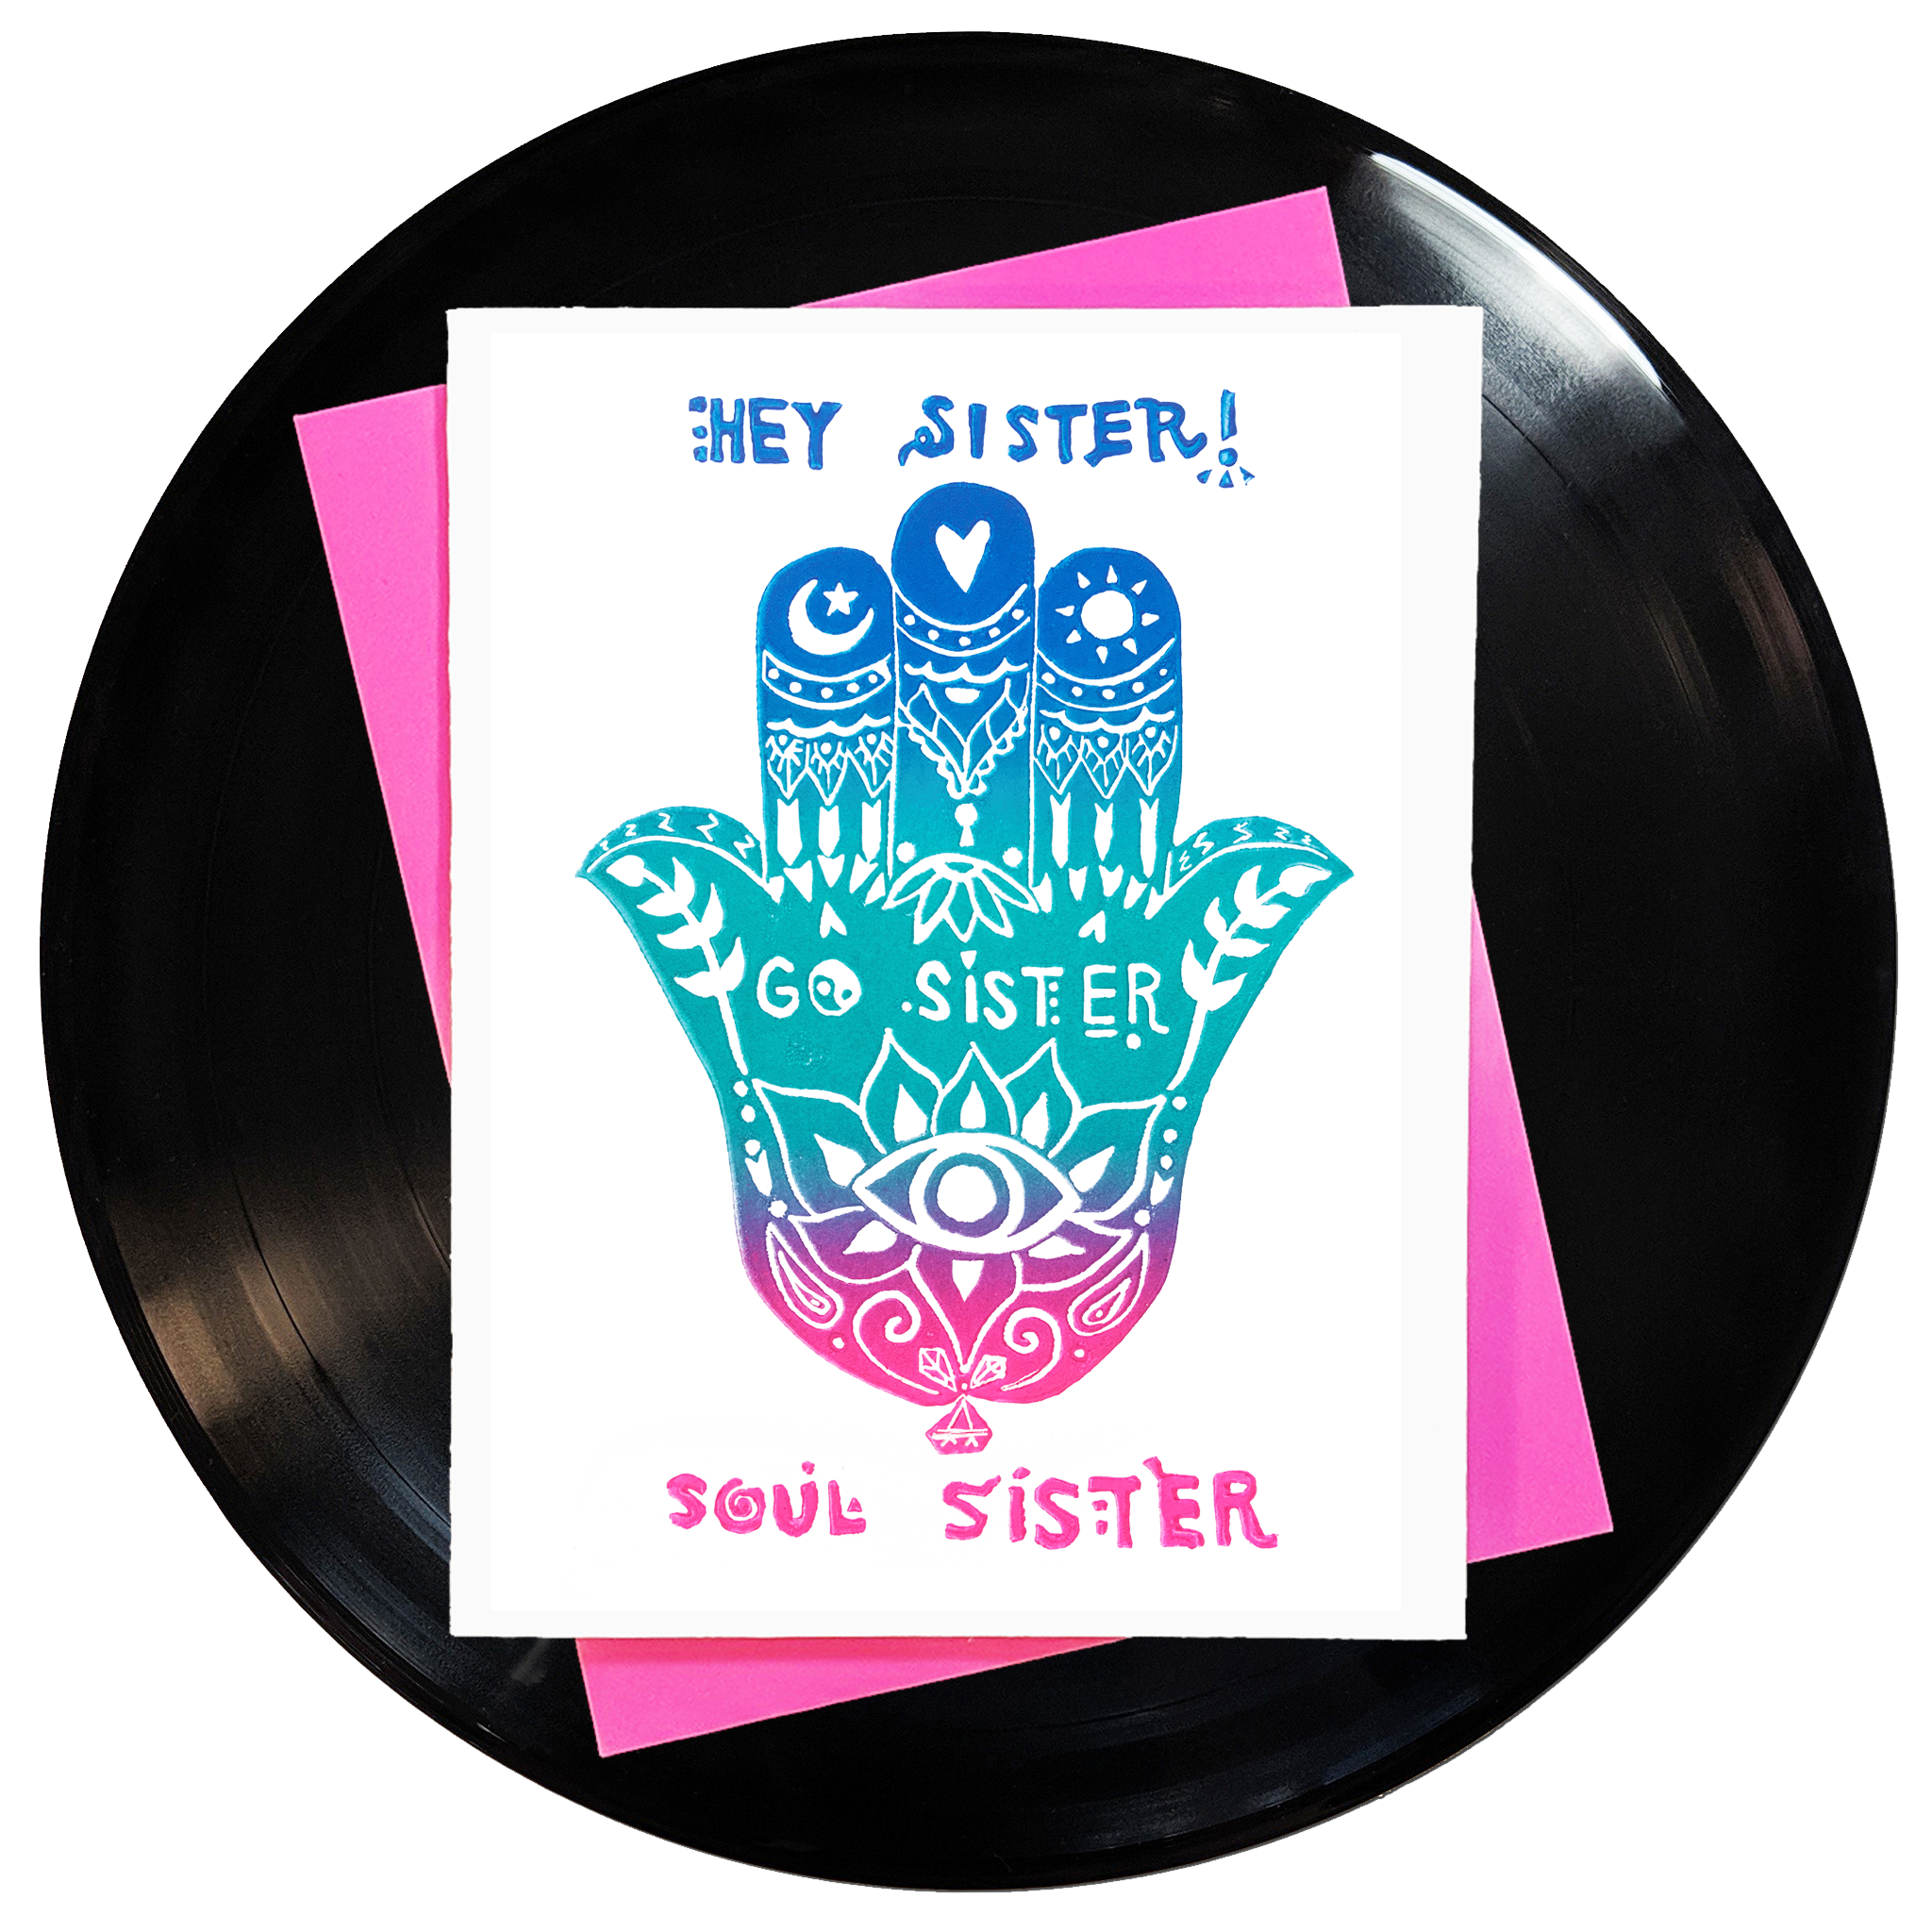 Hey Sister Go Sister Soul Sister Greeting Card 6-Pack Inspired By Music